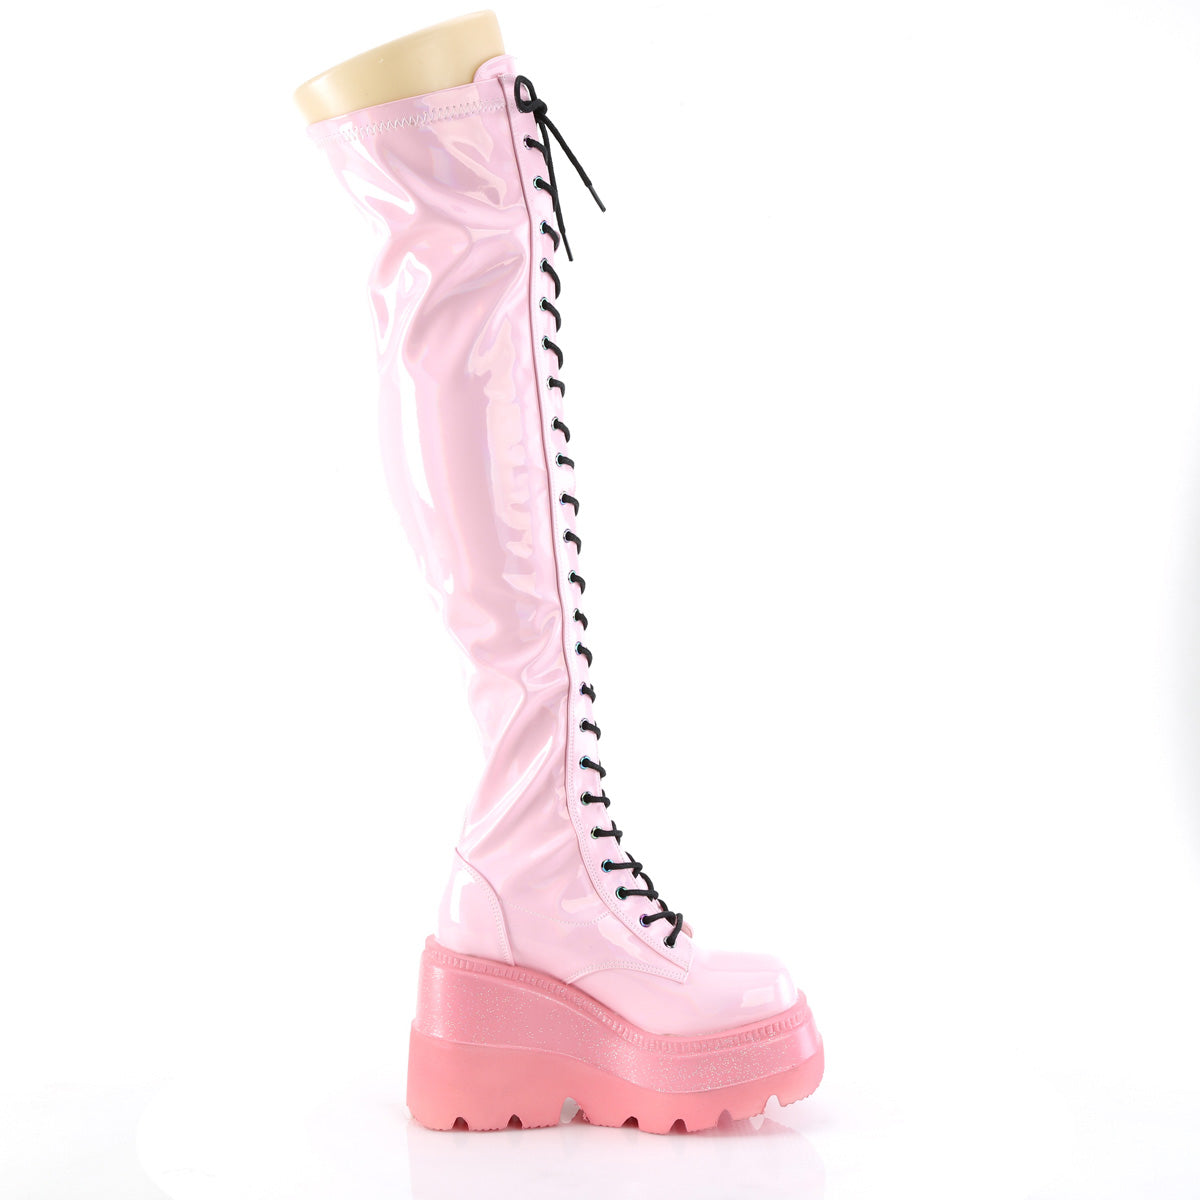 DemoniaCult  Boots SHAKER-374-1 B. Pink Hologram Stretch Patent